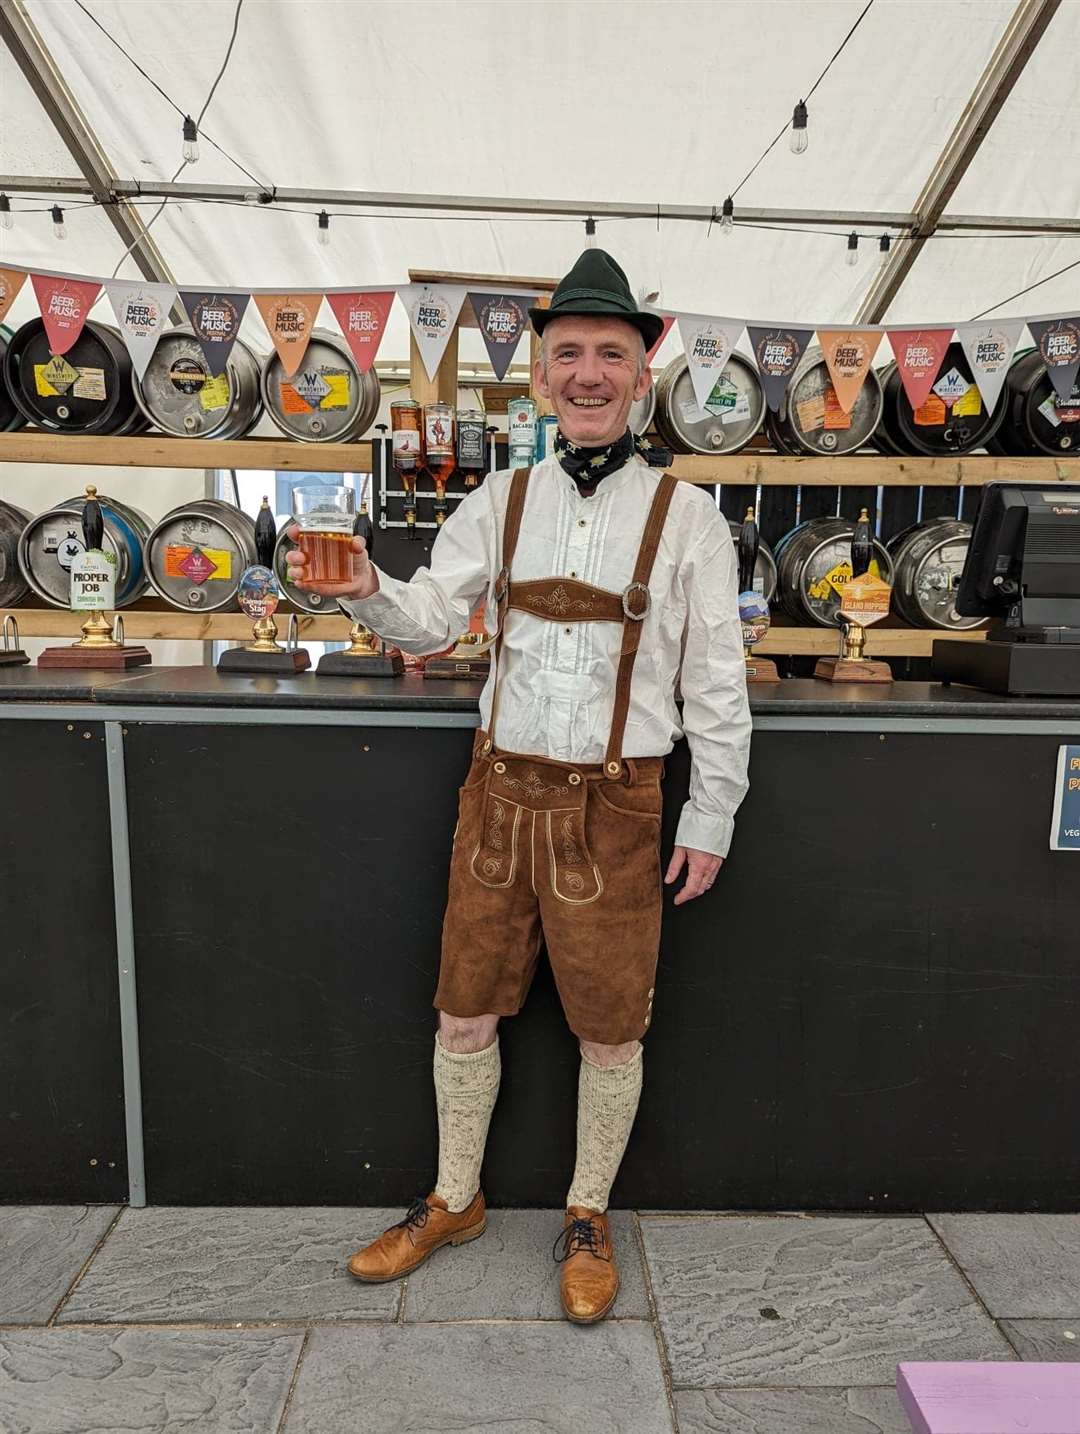 Paul Geddes, owner of the Bandstand got into the spirit of things wearing traditional Lederhosen to celebrate German beers at the festival.